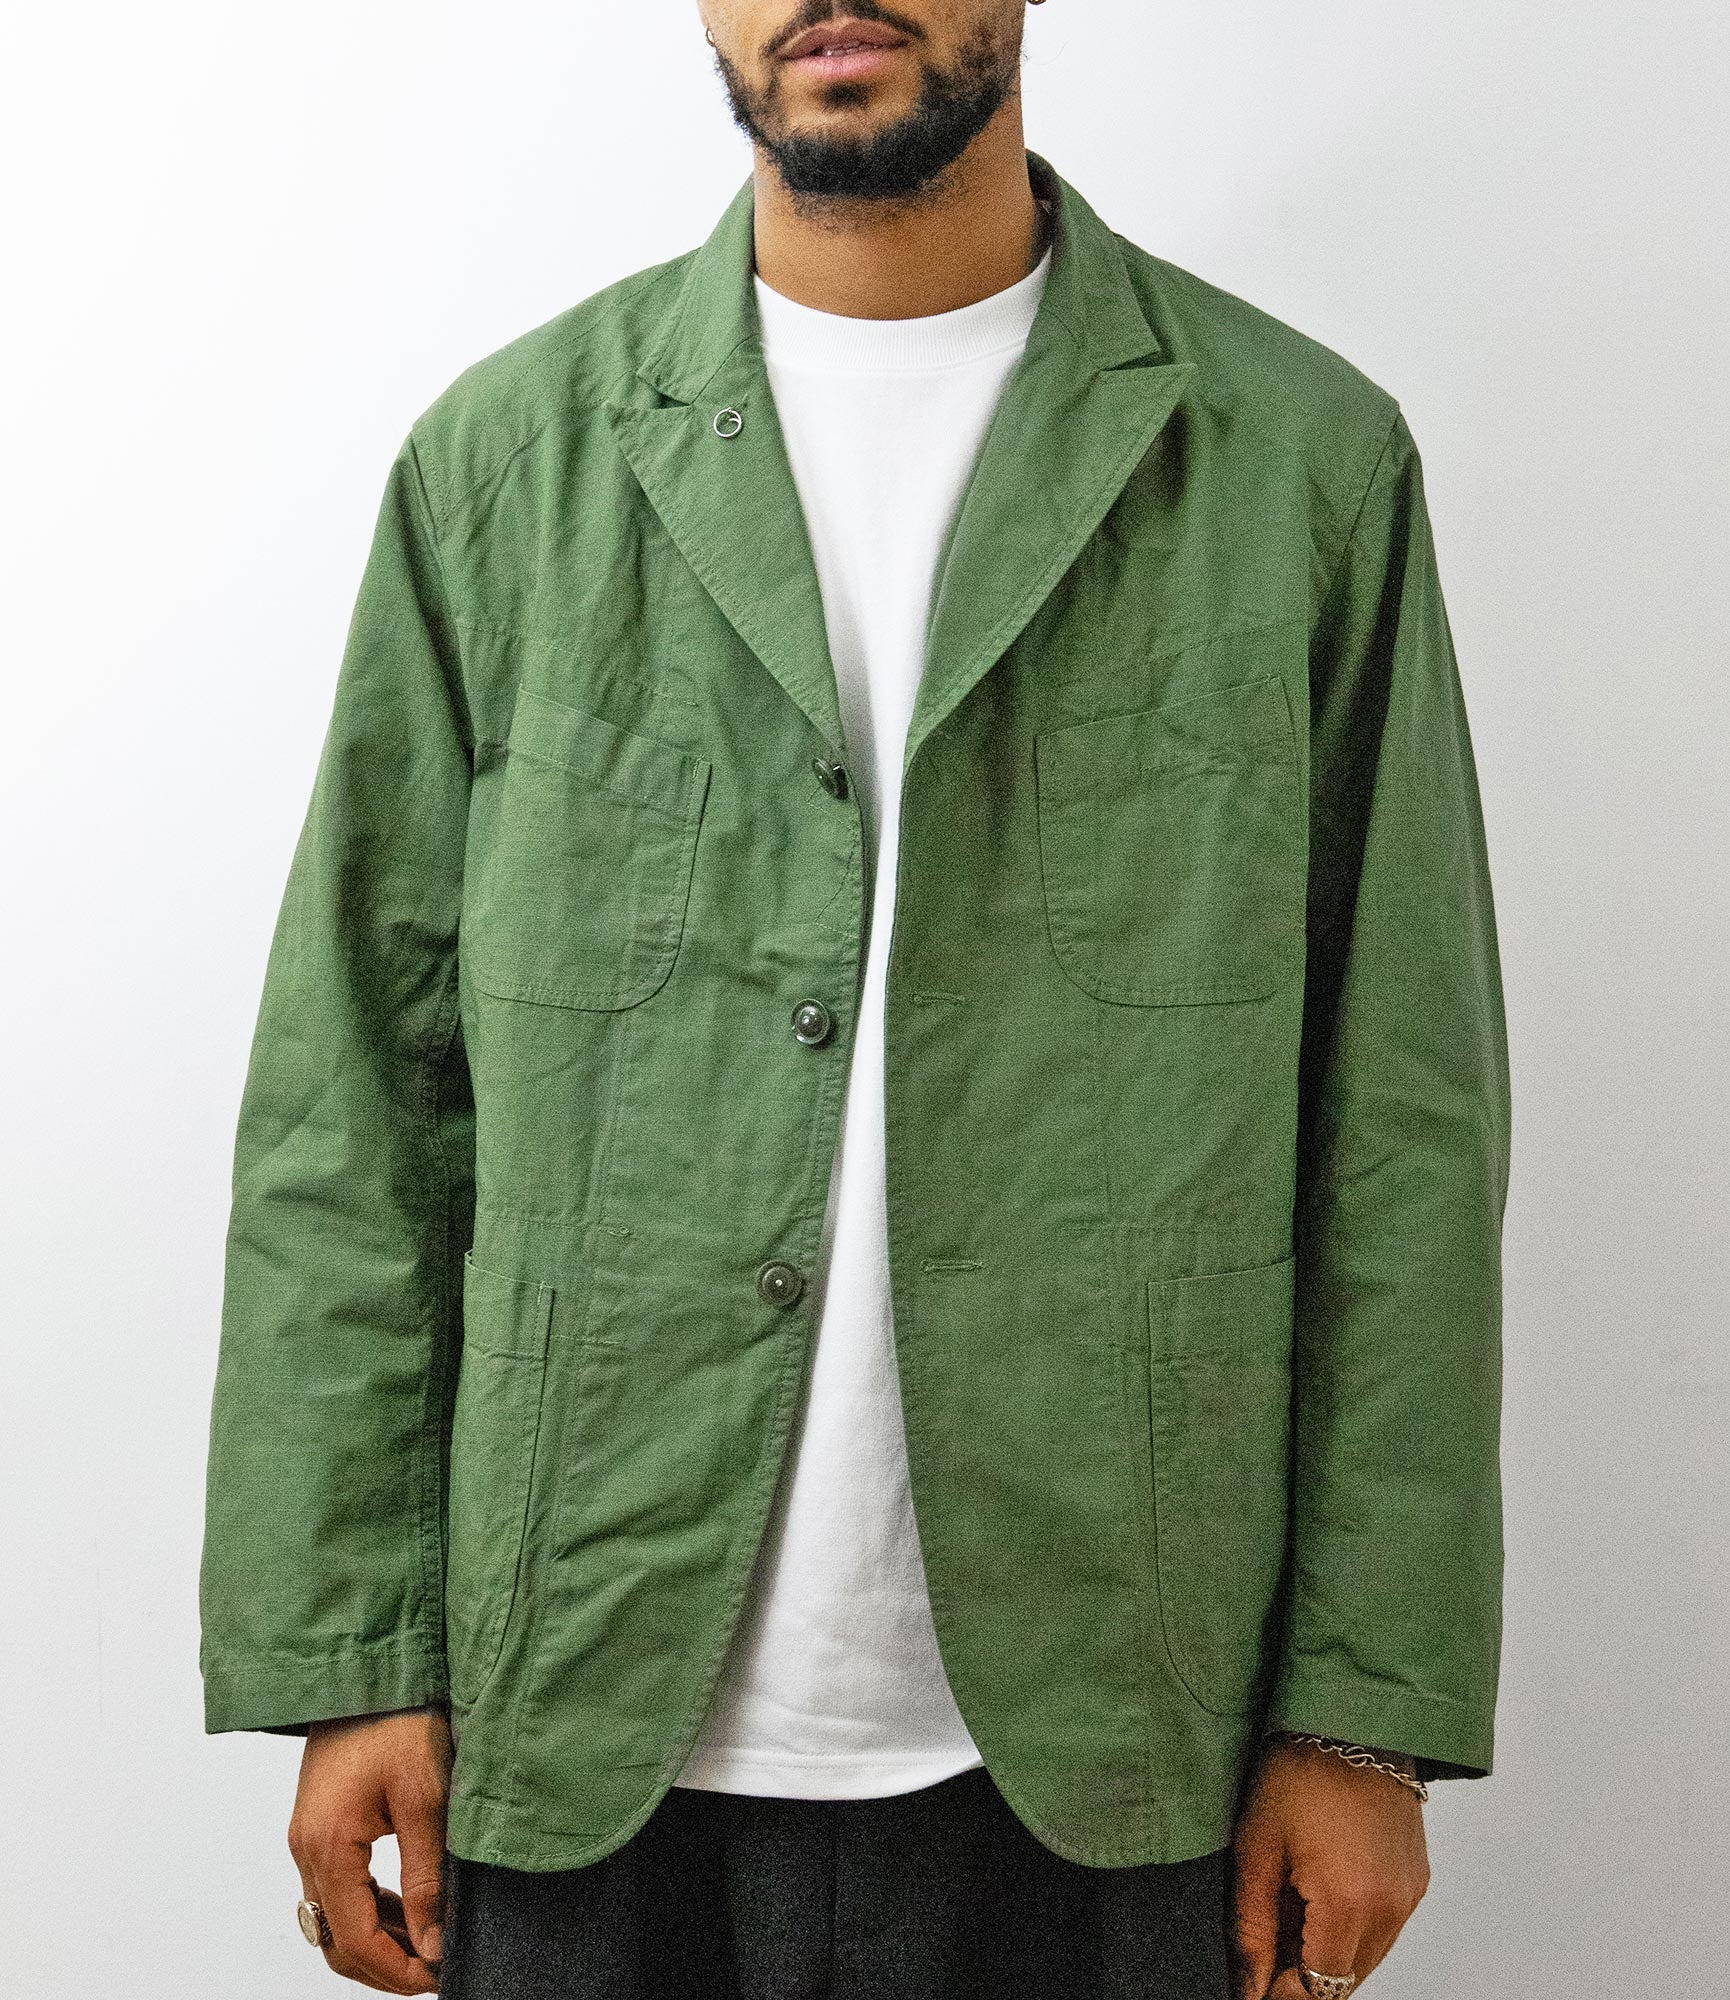 Engineered Garments Bedford Jacket - Olive Cotton Ripstop